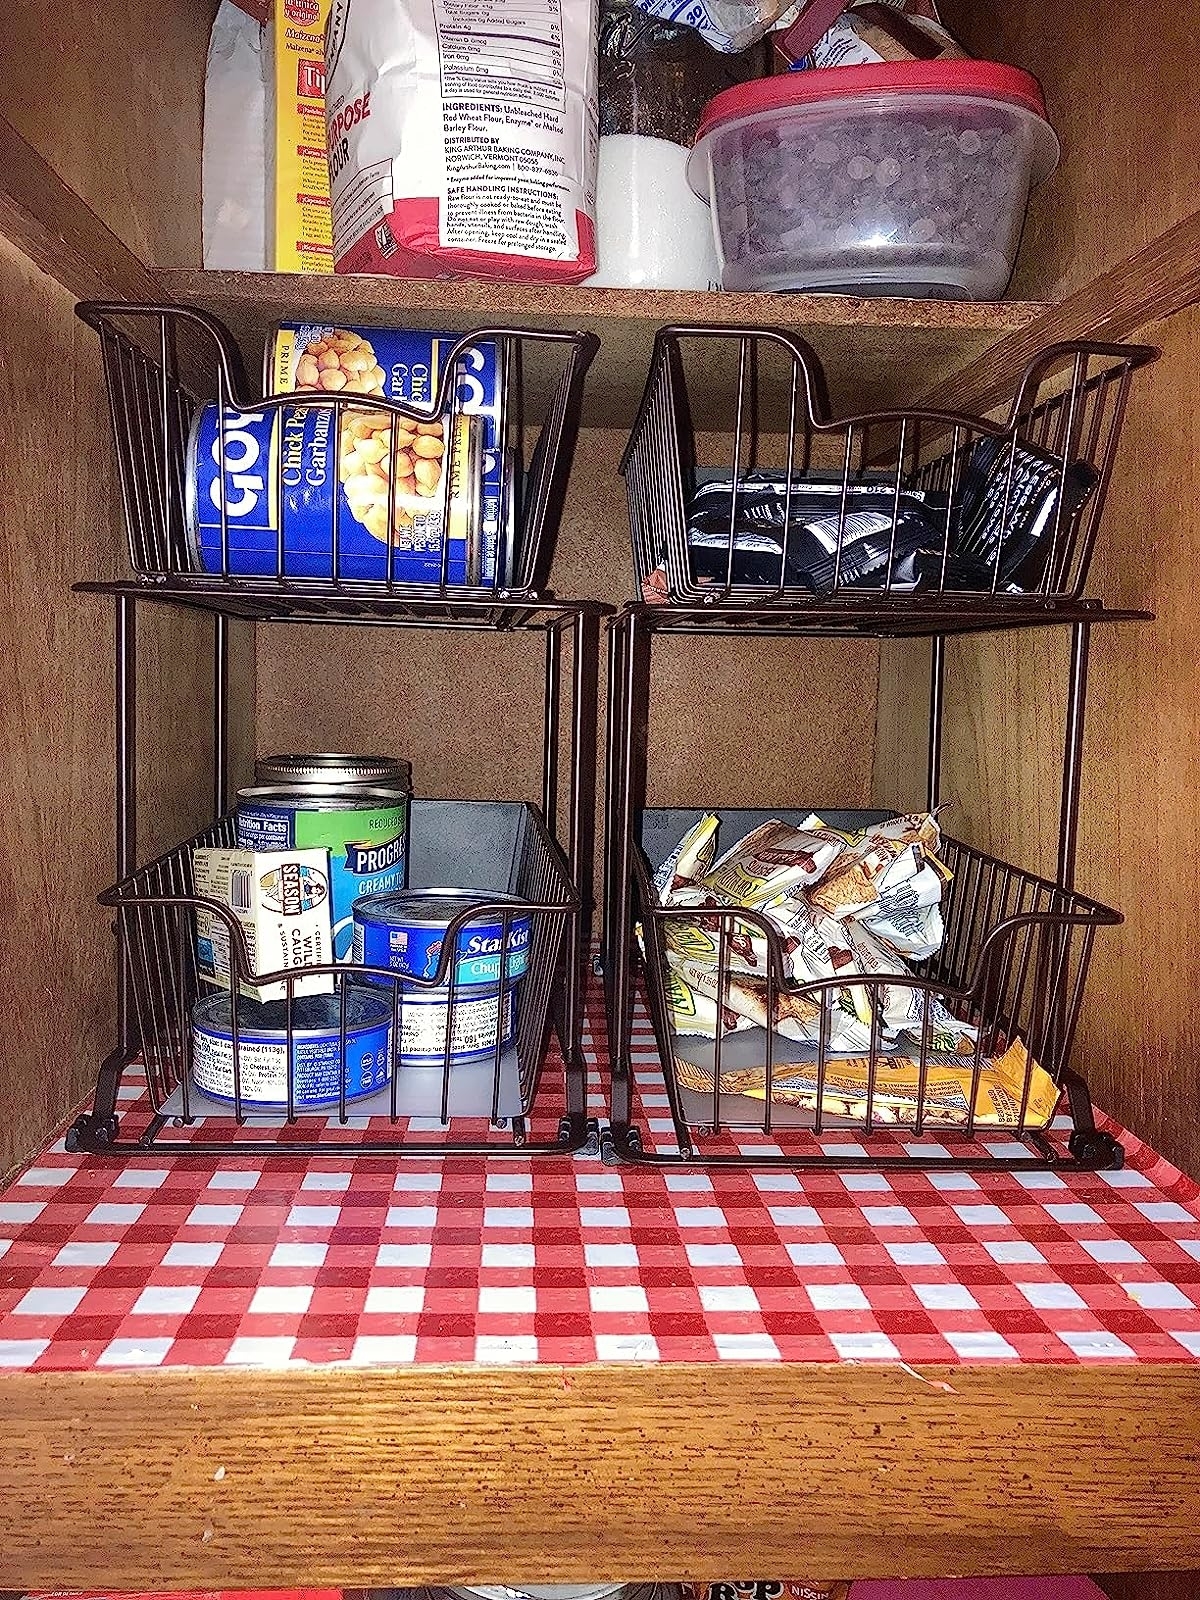 Reviewer image of pantry items inside the wire organizers in a cabinet